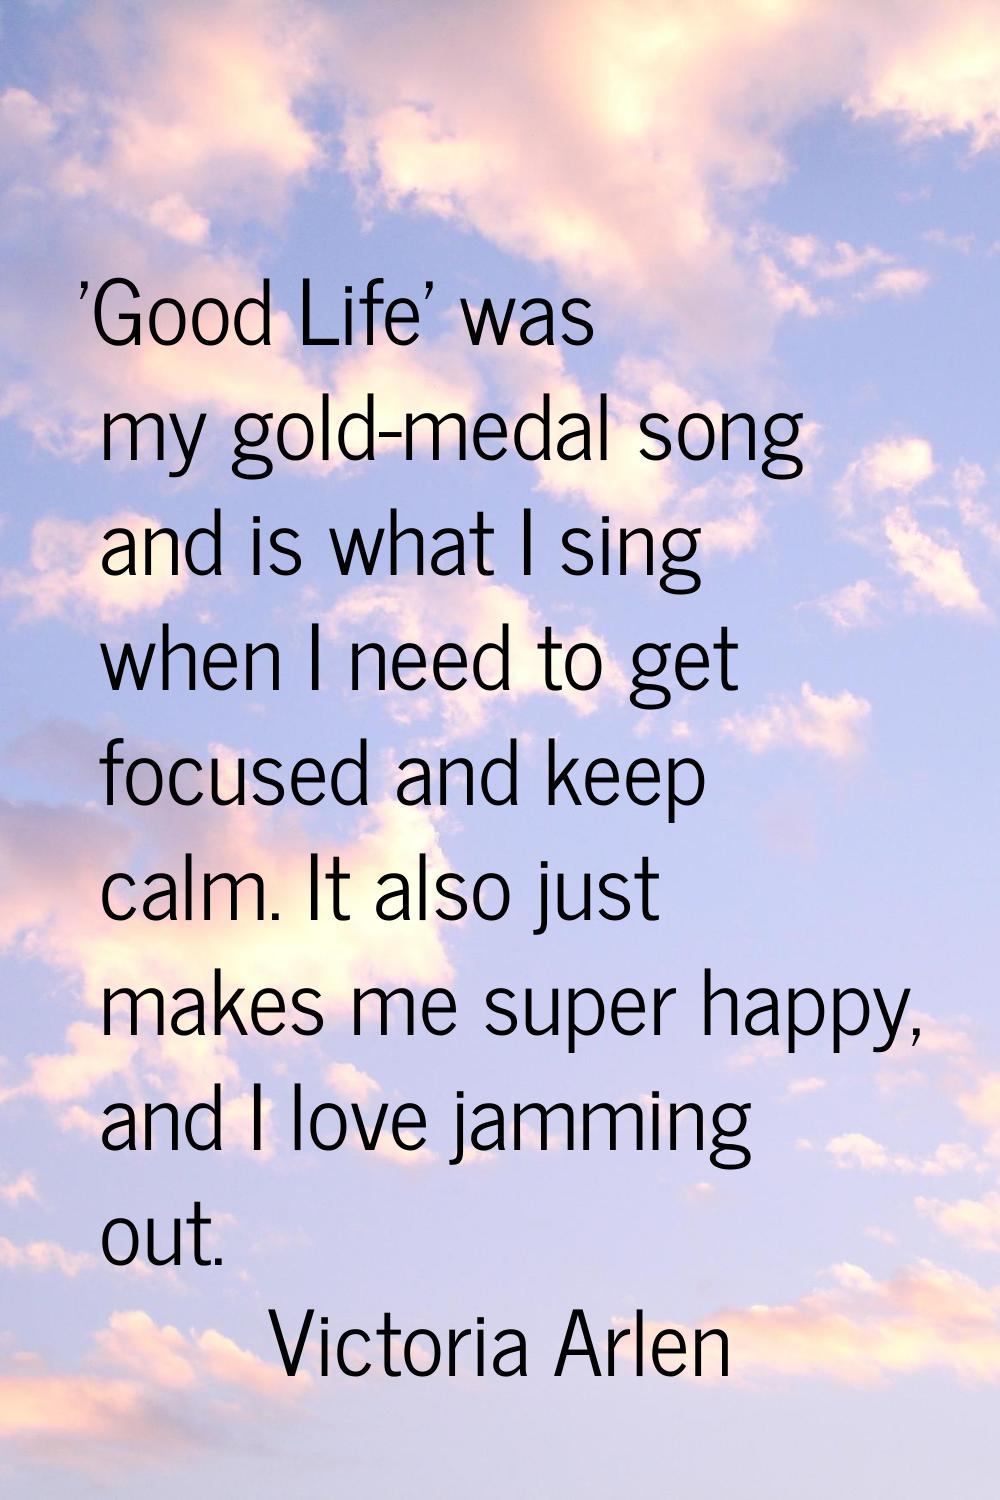 'Good Life' was my gold-medal song and is what I sing when I need to get focused and keep calm. It 